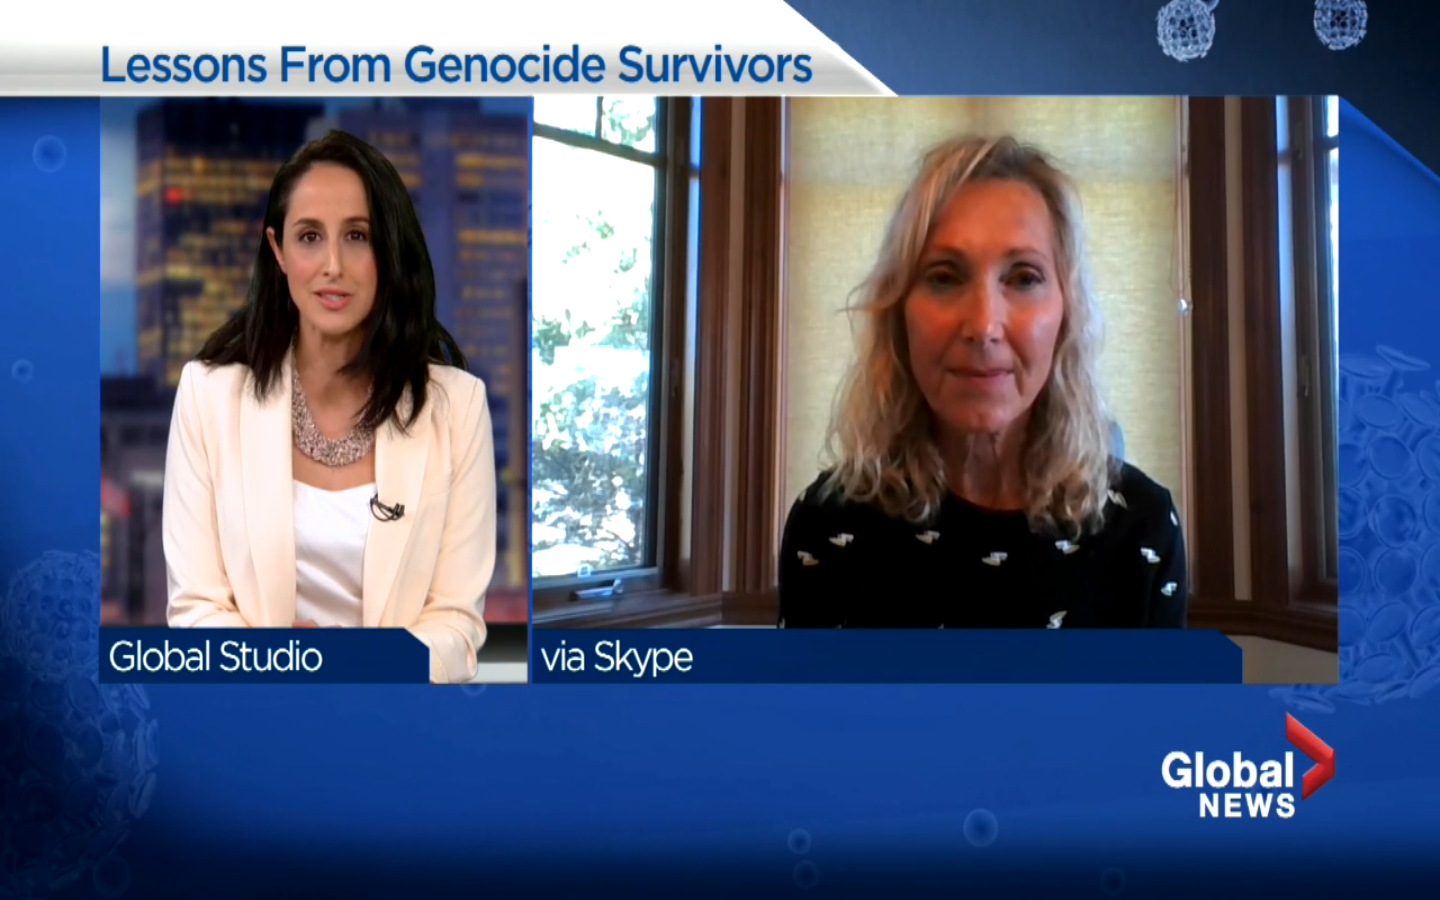 What we can learn from genocide survivors amid the pandemic